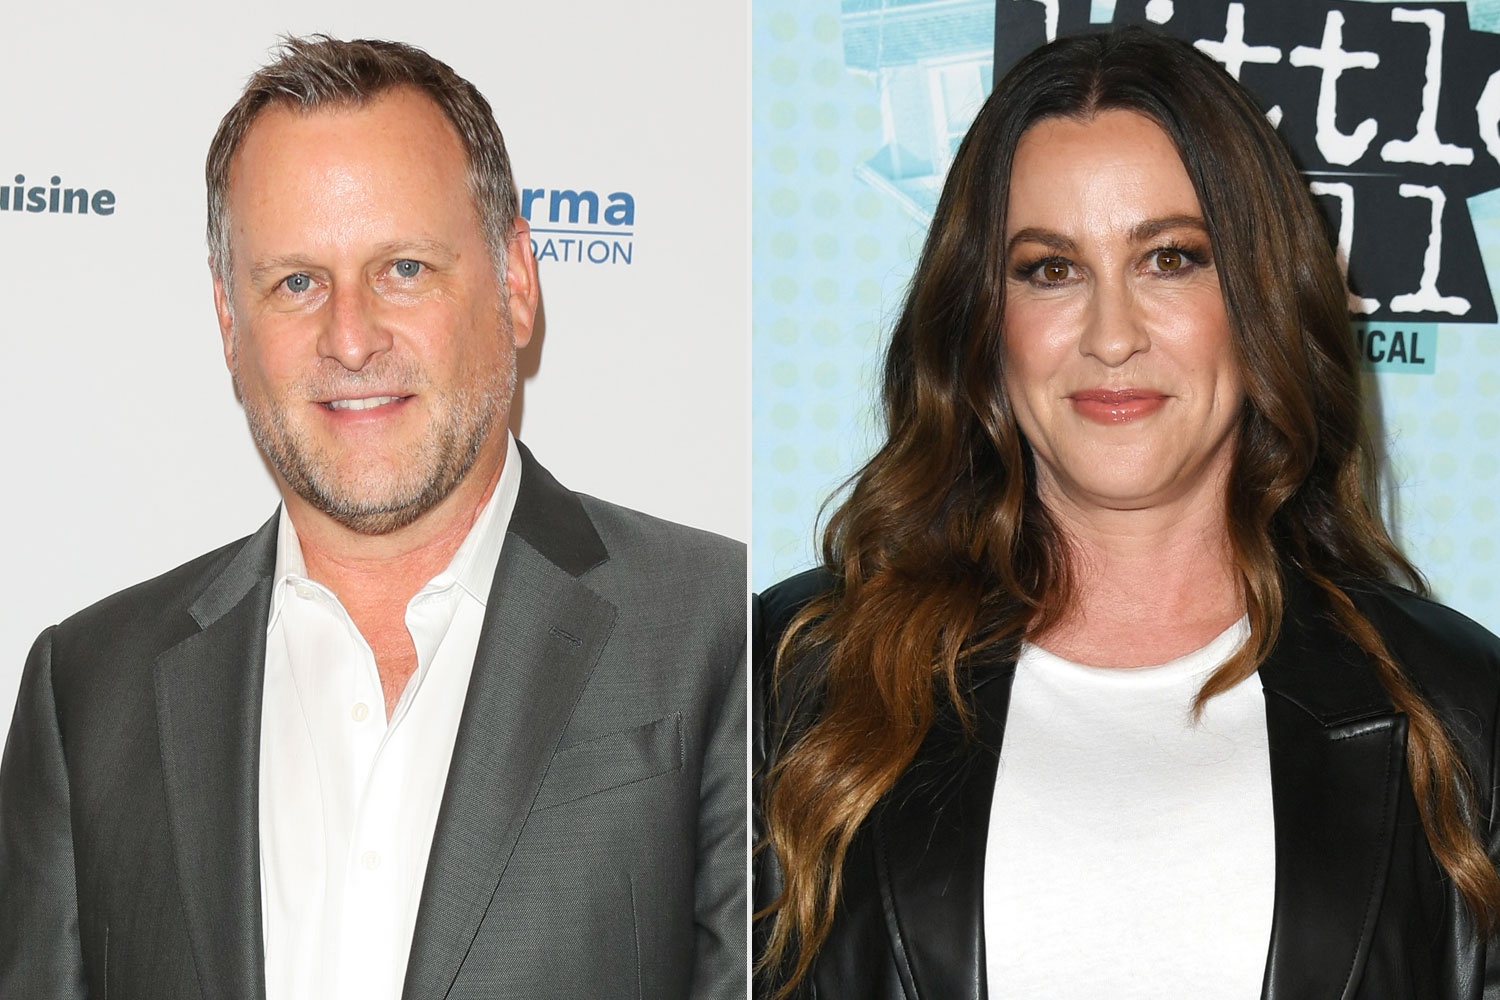 BEVERLY HILLS, CA - JUNE 16: Actor / Comedian Dave Coulier attends the 30th annual Scleroderma Benefit at the Beverly Wilshire Four Seasons Hotel on June 16, 2017 in Beverly Hills, California. (Photo by Paul Archuleta/FilmMagic); HOLLYWOOD, CALIFORNIA - SEPTEMBER 14: Recording artist Alanis Morissette attends the Los Angeles Premiere of "Jagged Little Pill" at Hollywood Pantages Theatre on September 14, 2022 in Hollywood, California. (Photo by JC Olivera/Getty Images)